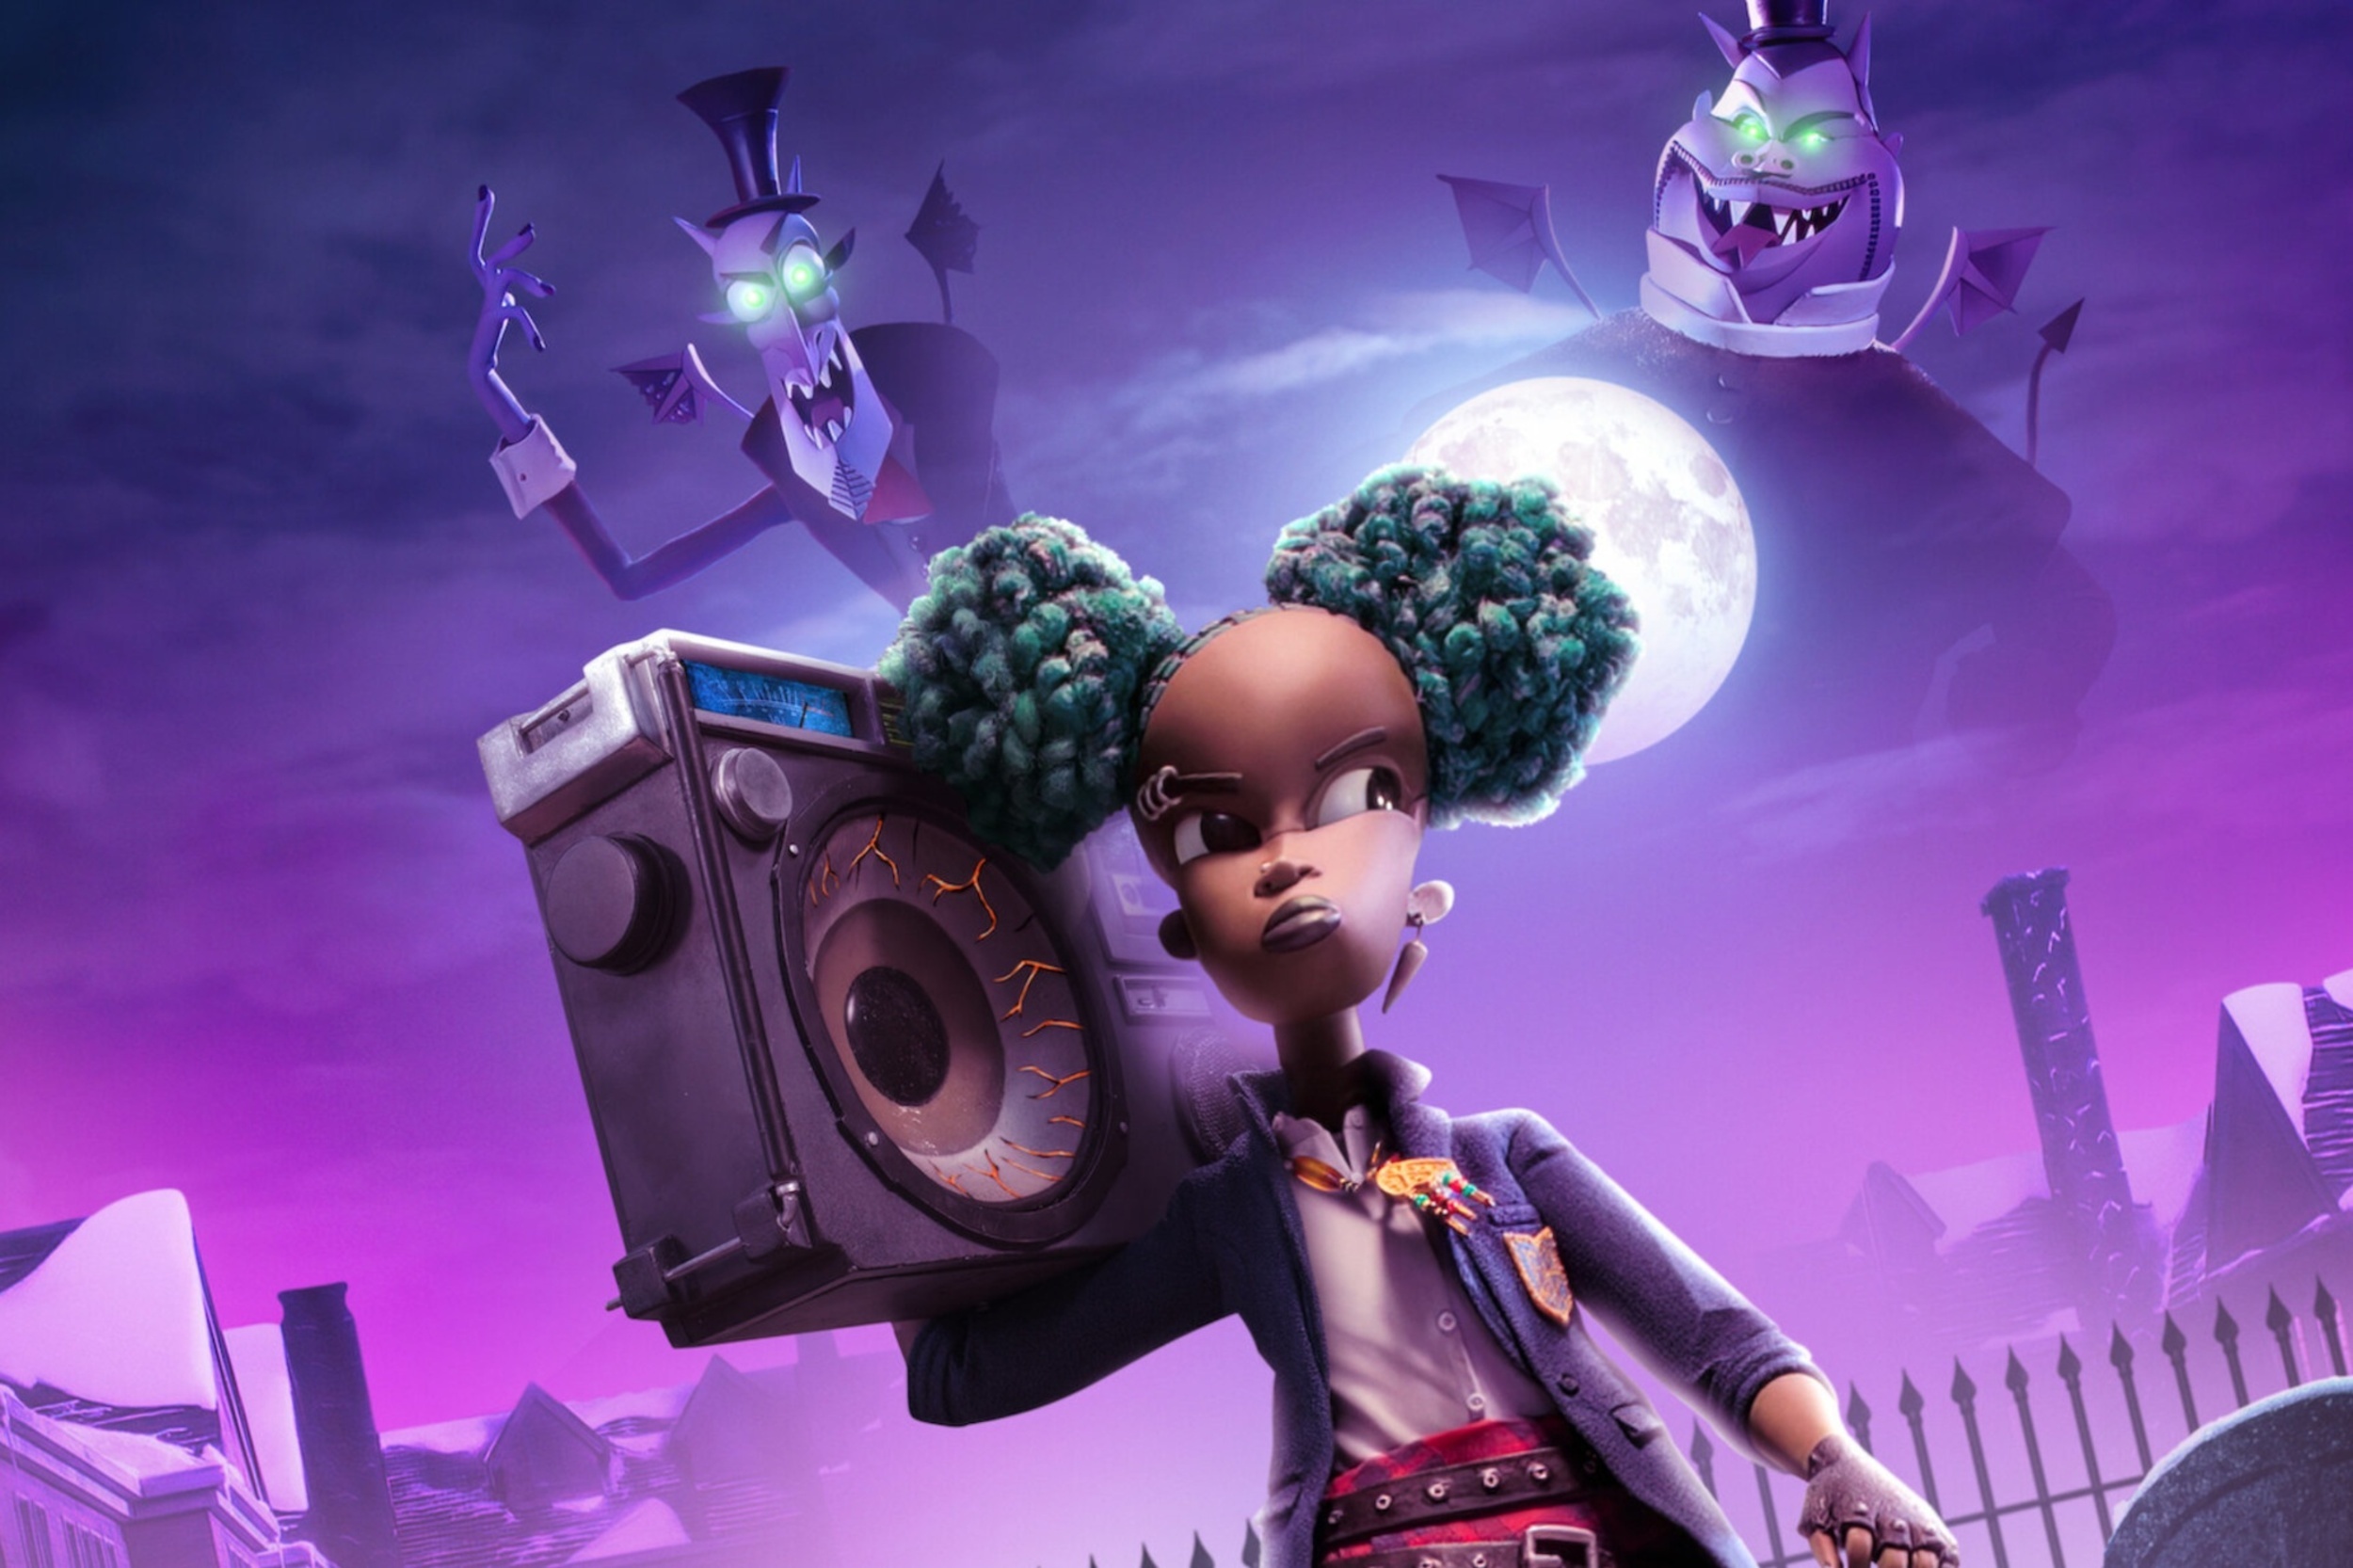 <p>Thirteen years after the release of <em>Coraline</em>, Henry Selick returned to the world of stop-motion animation with Netflix’s <em>Wendell & Wild</em>. Comedy duo Jordan Peele and Keegan-Michael Key voice the two titular demons, who enlist the help of a teenage girl named Kat to summon them to the Land of the Living. Featuring the exquisite spooky vibes Selick is known for, the film is a visually quirky treat, as well as an effective exploration of grief and other realistic struggles. </p><p><a href='https://www.msn.com/en-us/community/channel/vid-cj9pqbr0vn9in2b6ddcd8sfgpfq6x6utp44fssrv6mc2gtybw0us'>Follow us on MSN to see more of our exclusive entertainment content.</a></p>